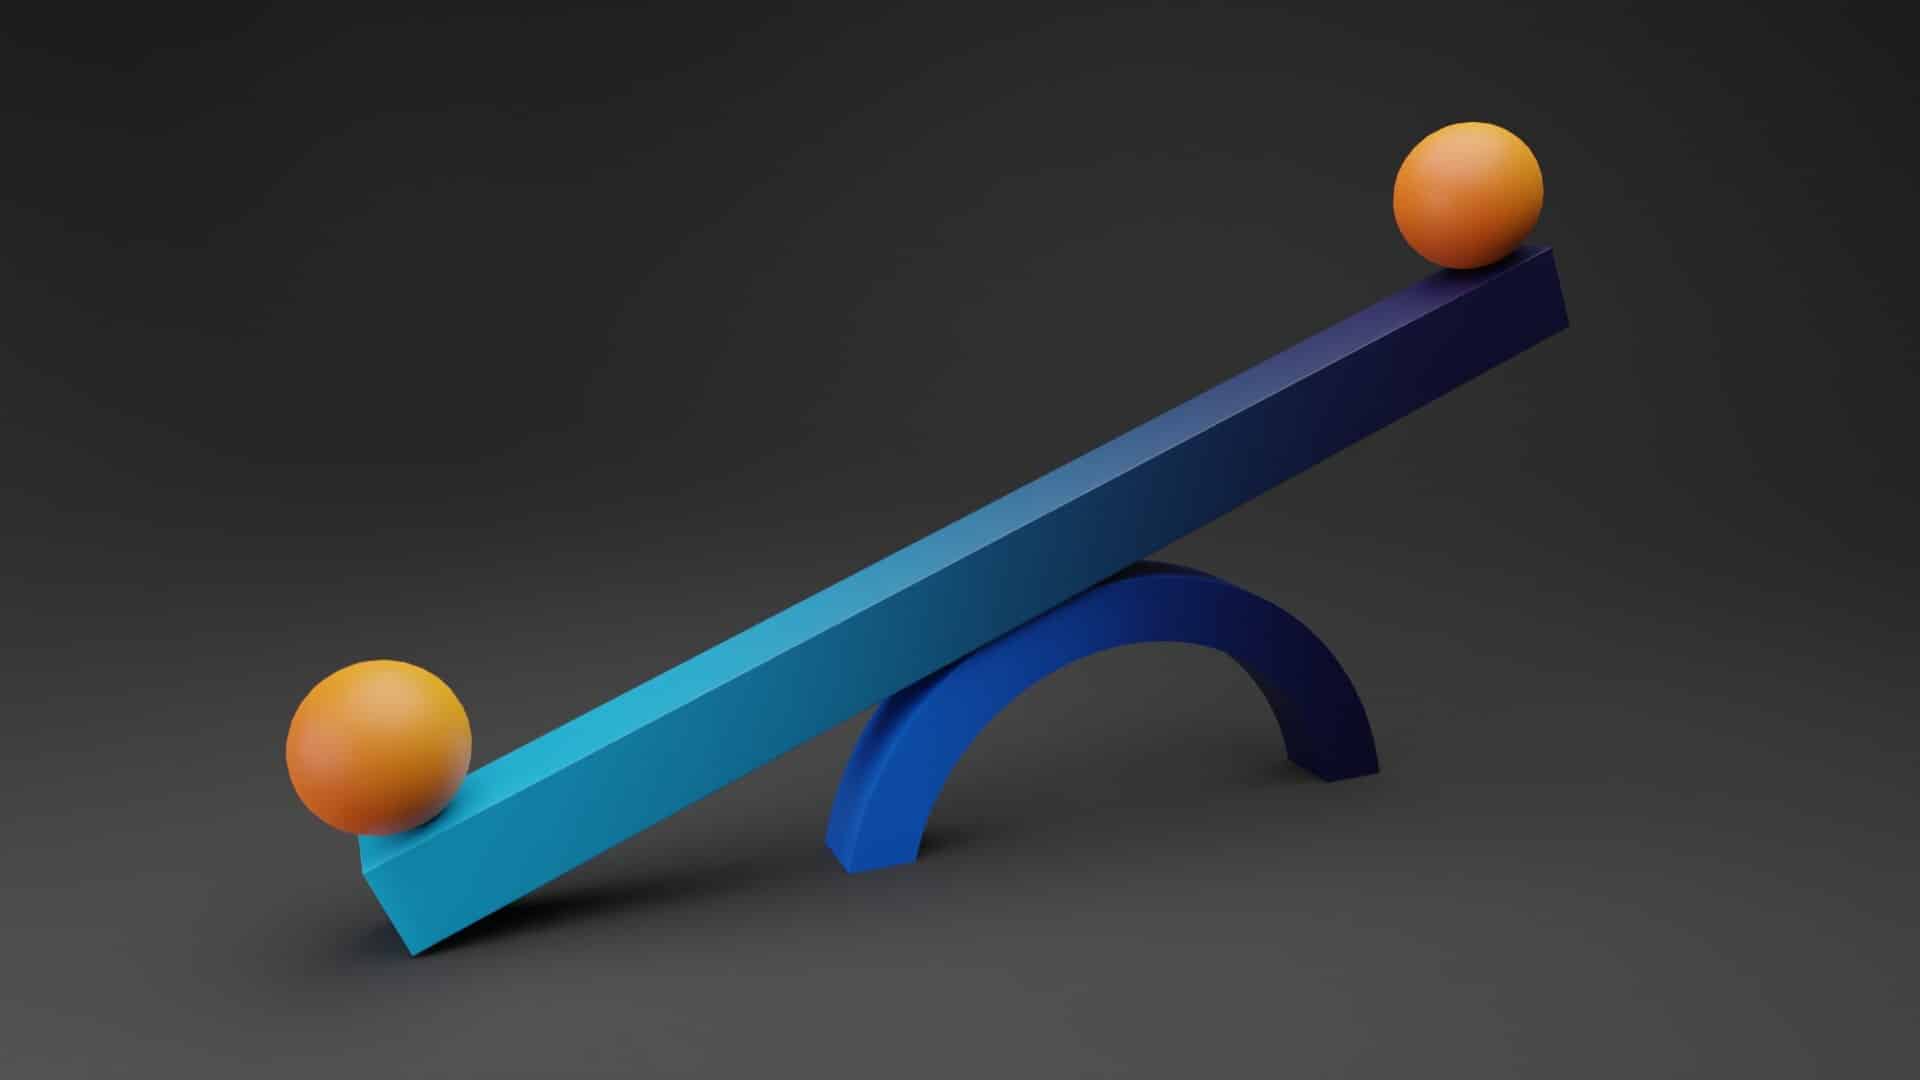 3D Created Image - seesaw